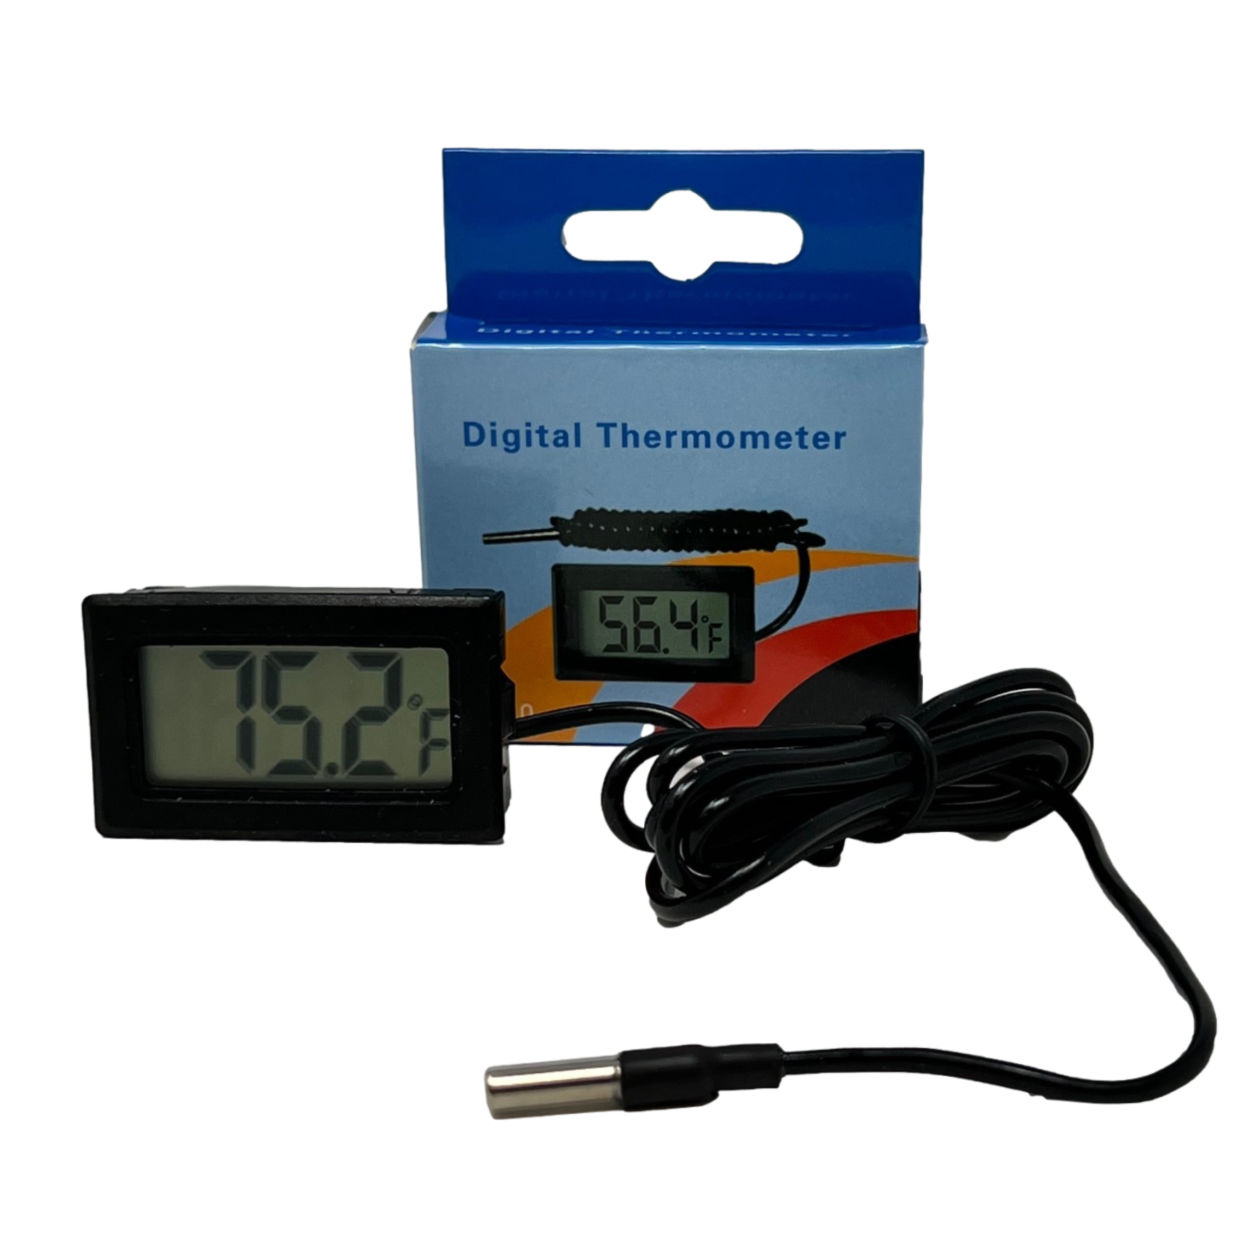 http://www.midwestgrowkits.com/Shared/Images/Product/Mini-Digital-Thermometer-With-36-Temperature-Probe/mini_therm_web_final.jpg